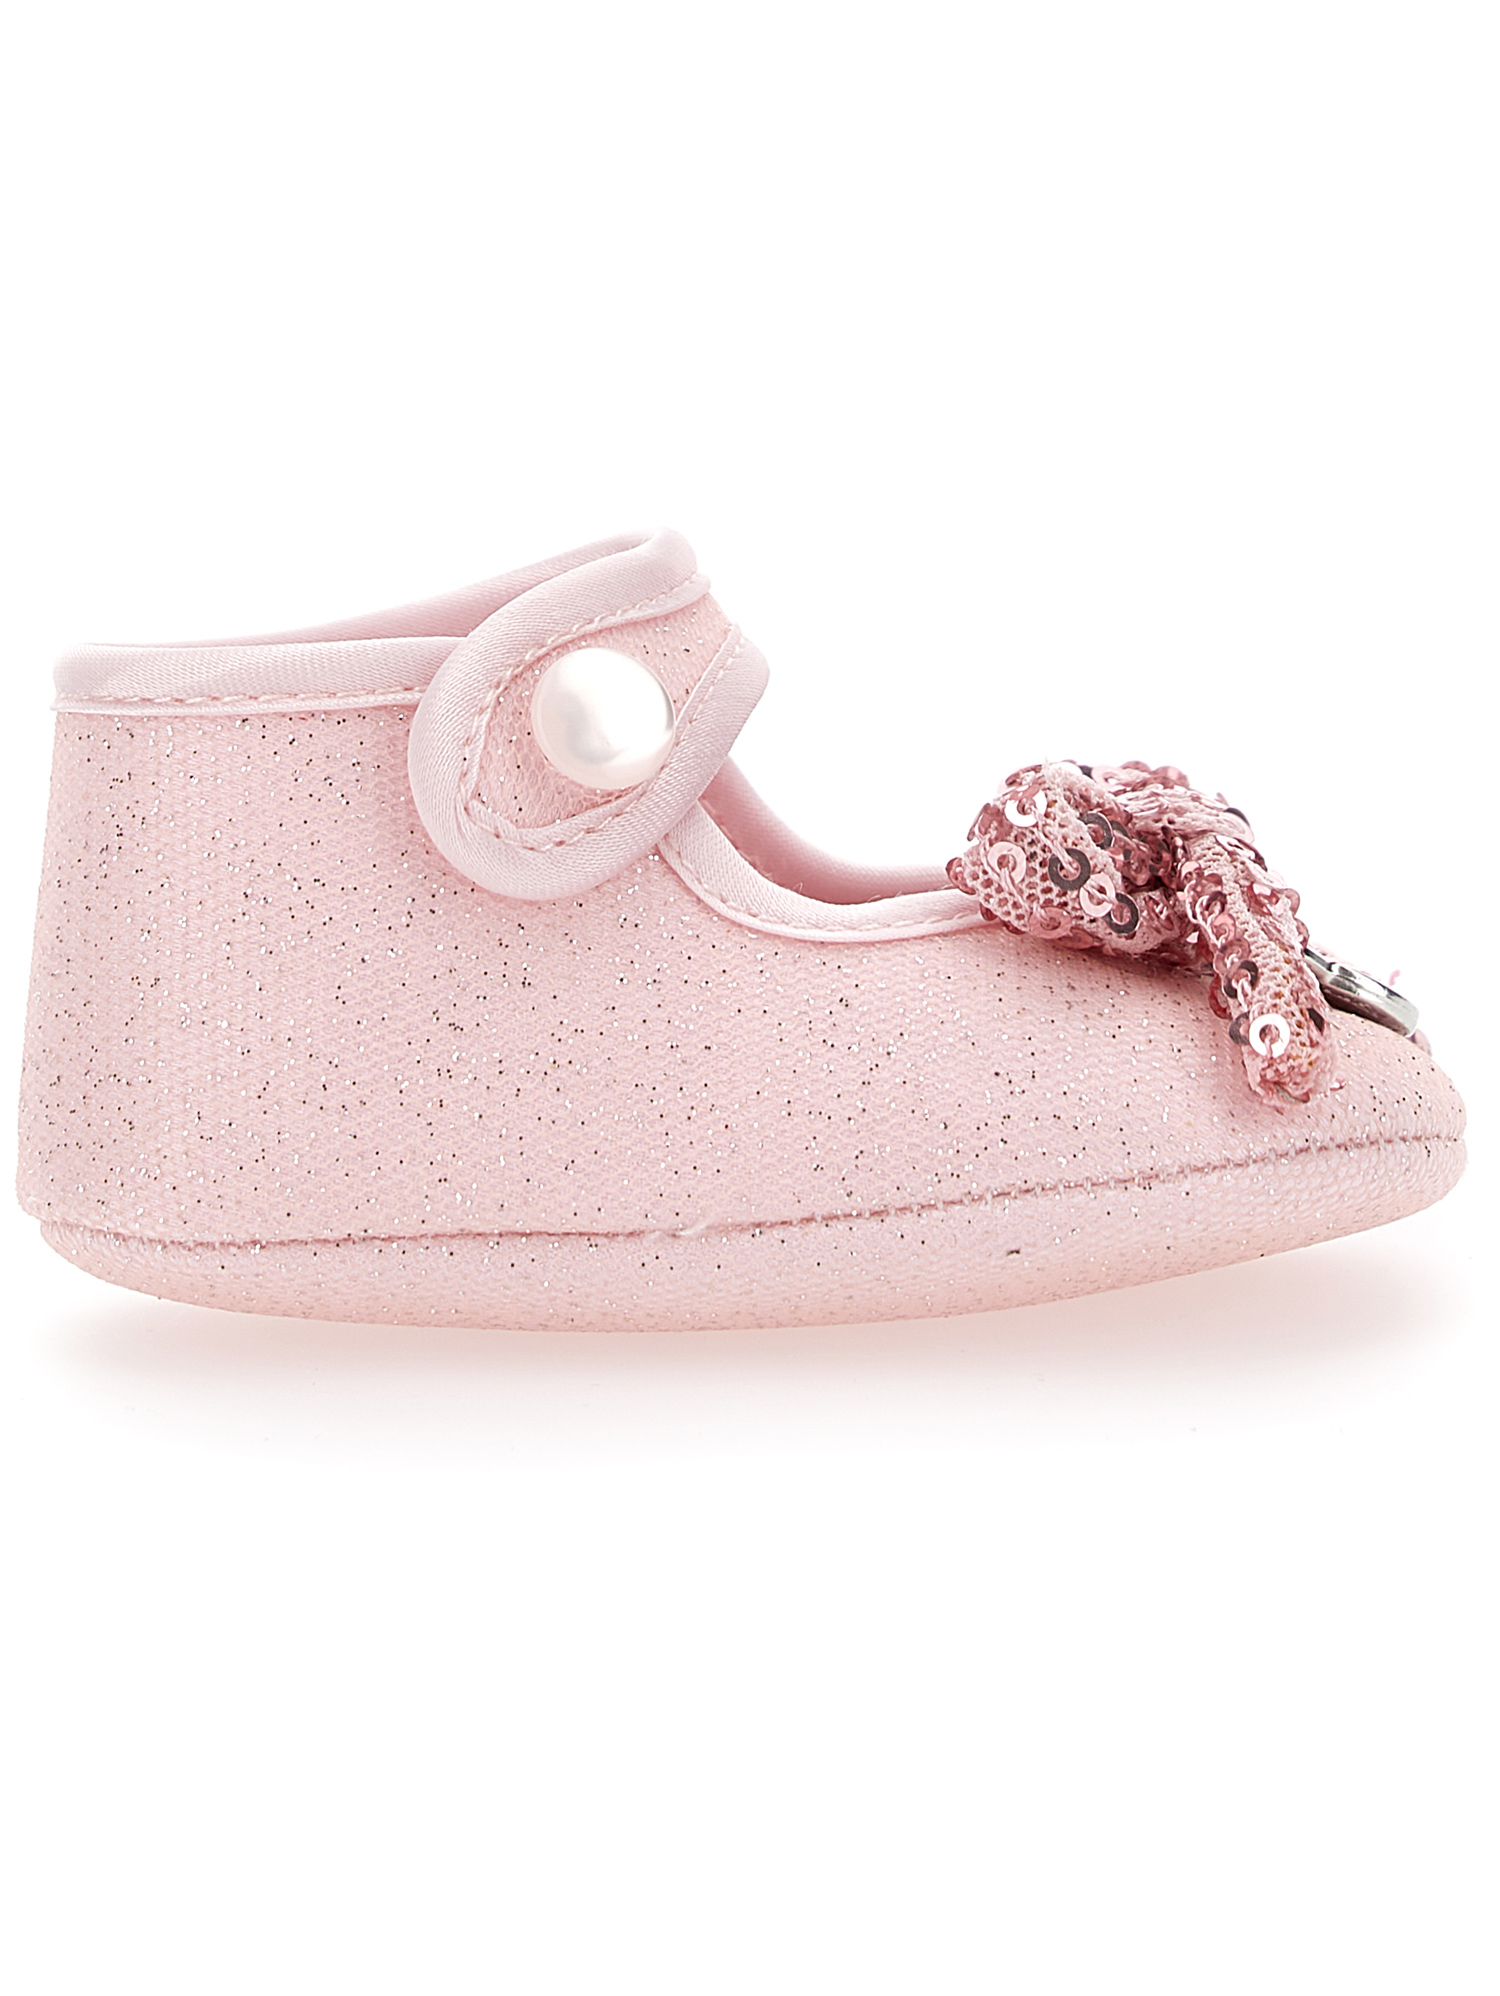 Monnalisa Tulle And Glitter Ballet Flats In Antique Rose + Silver